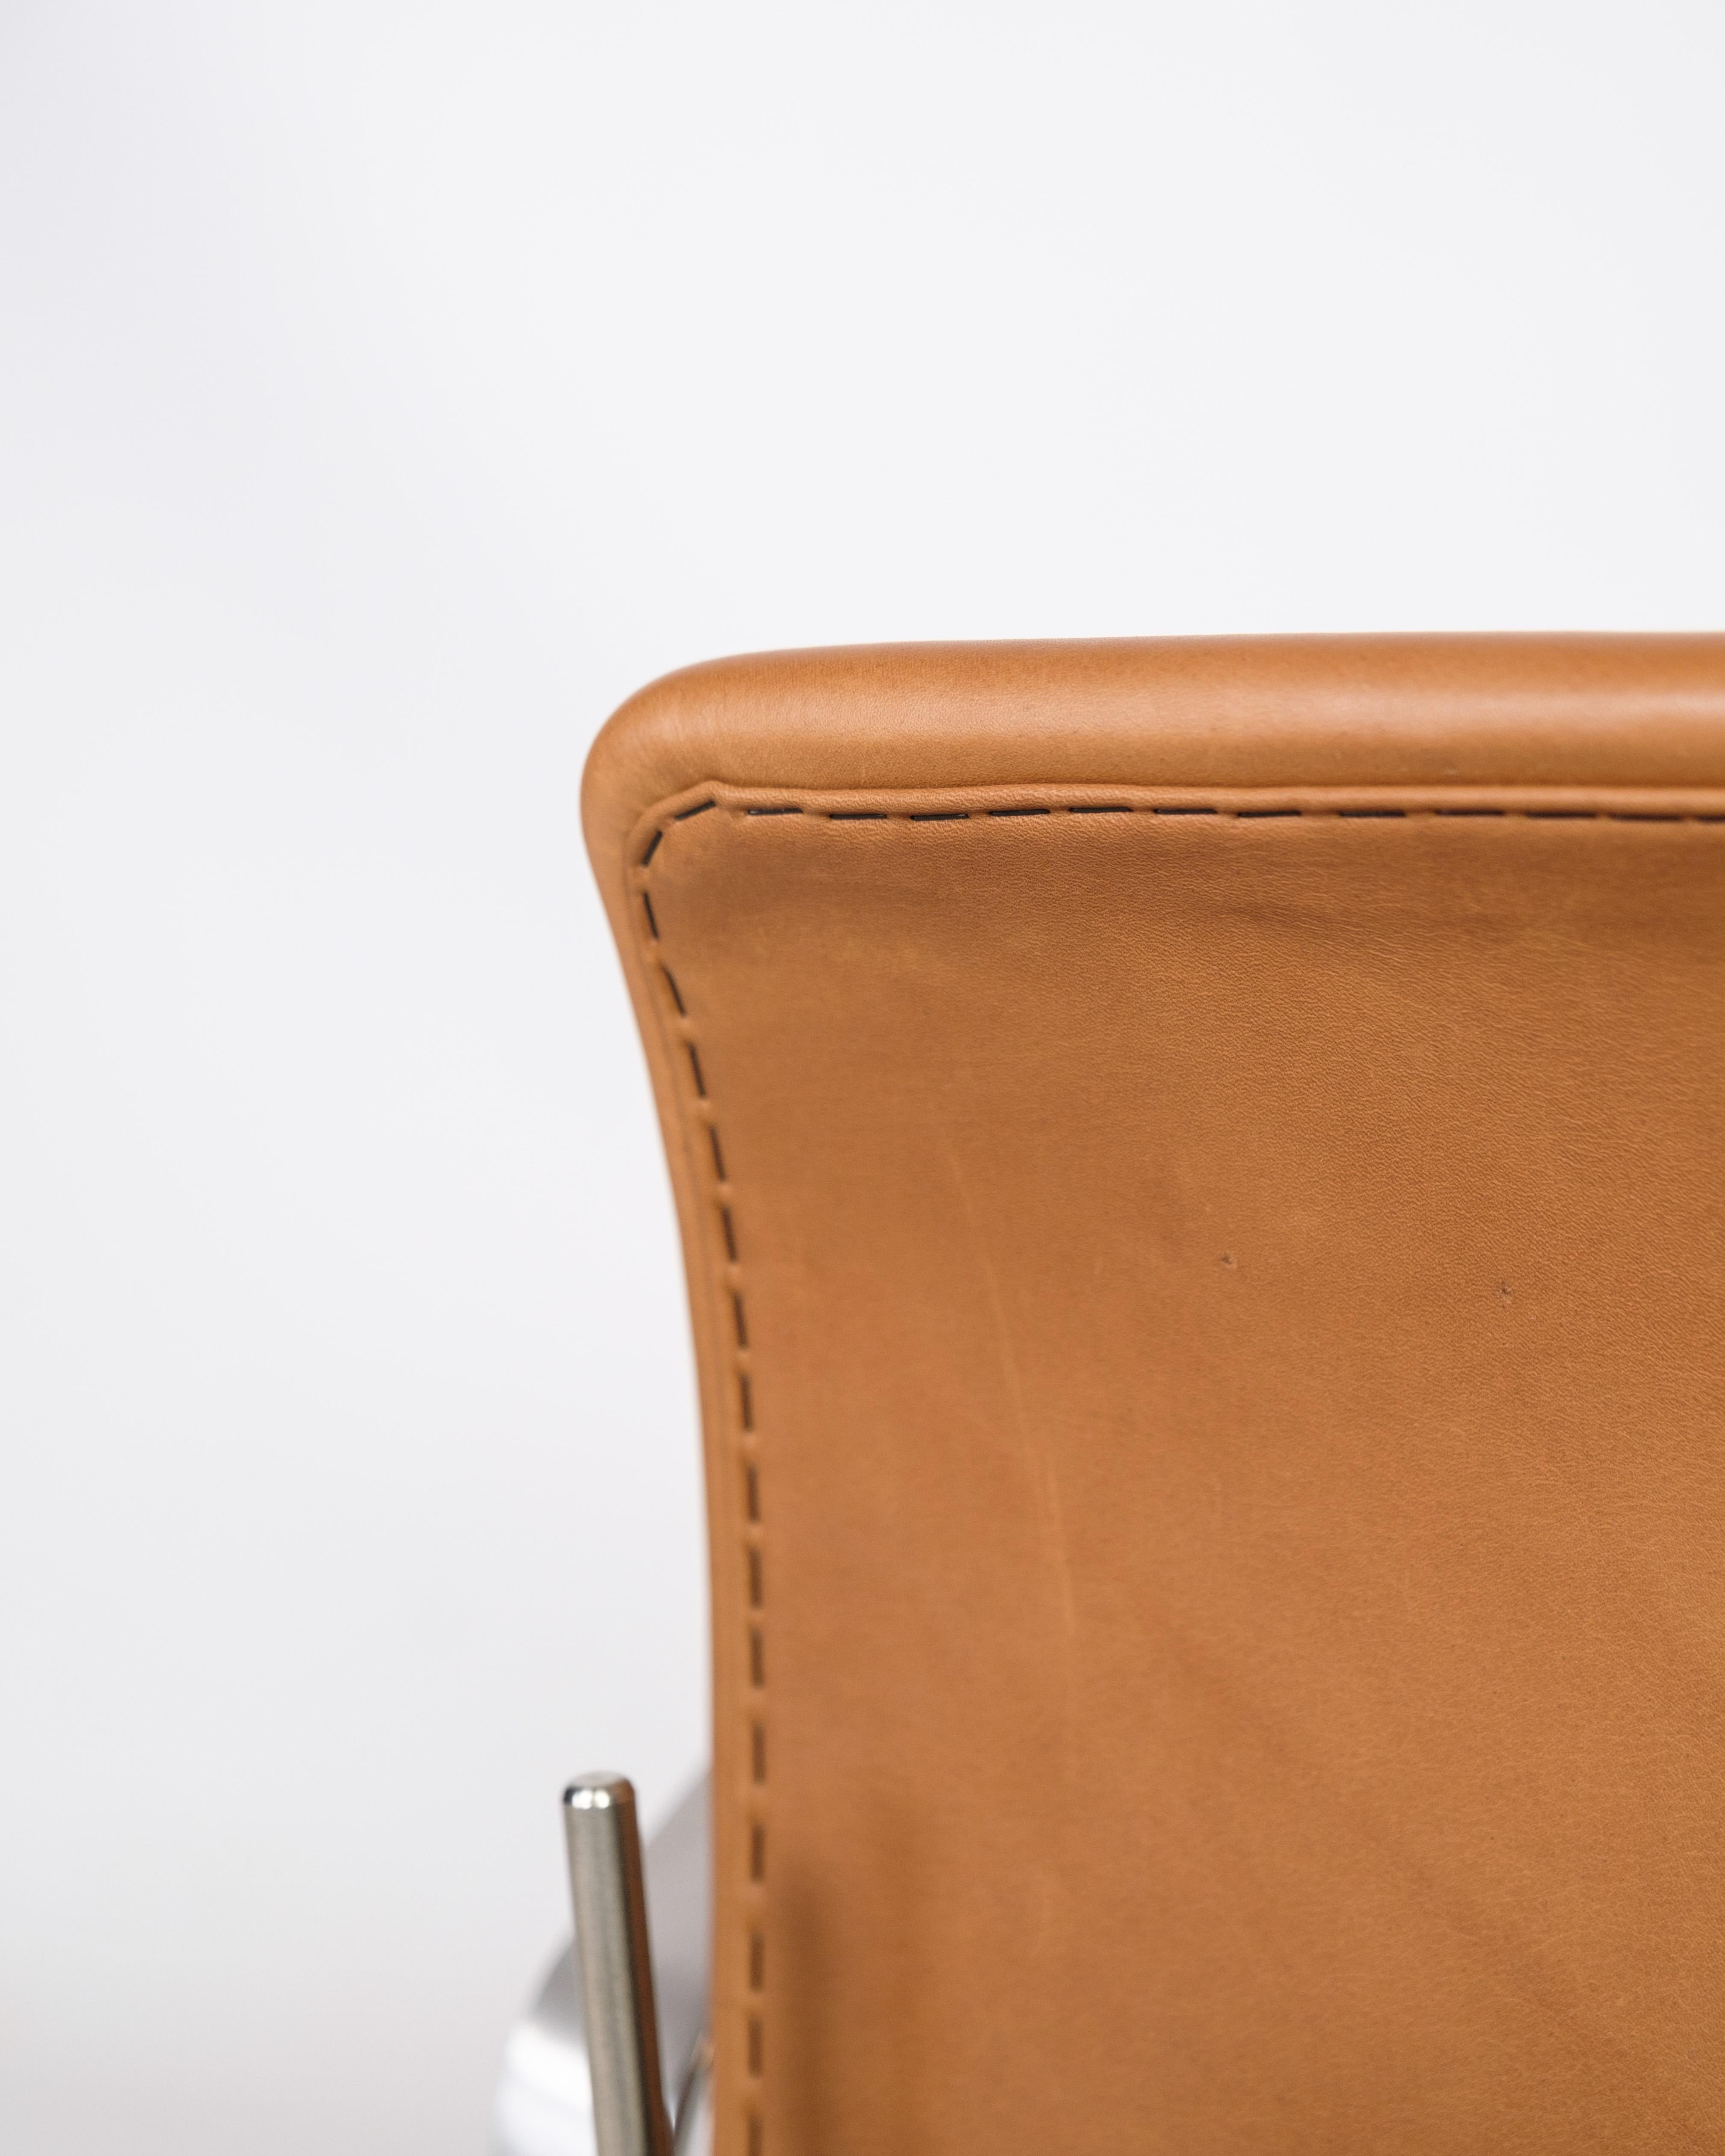 Oxford Classic Office Chair, Model 3293c, Cognac Leather, Arne Jacobsen, 1963 For Sale 2